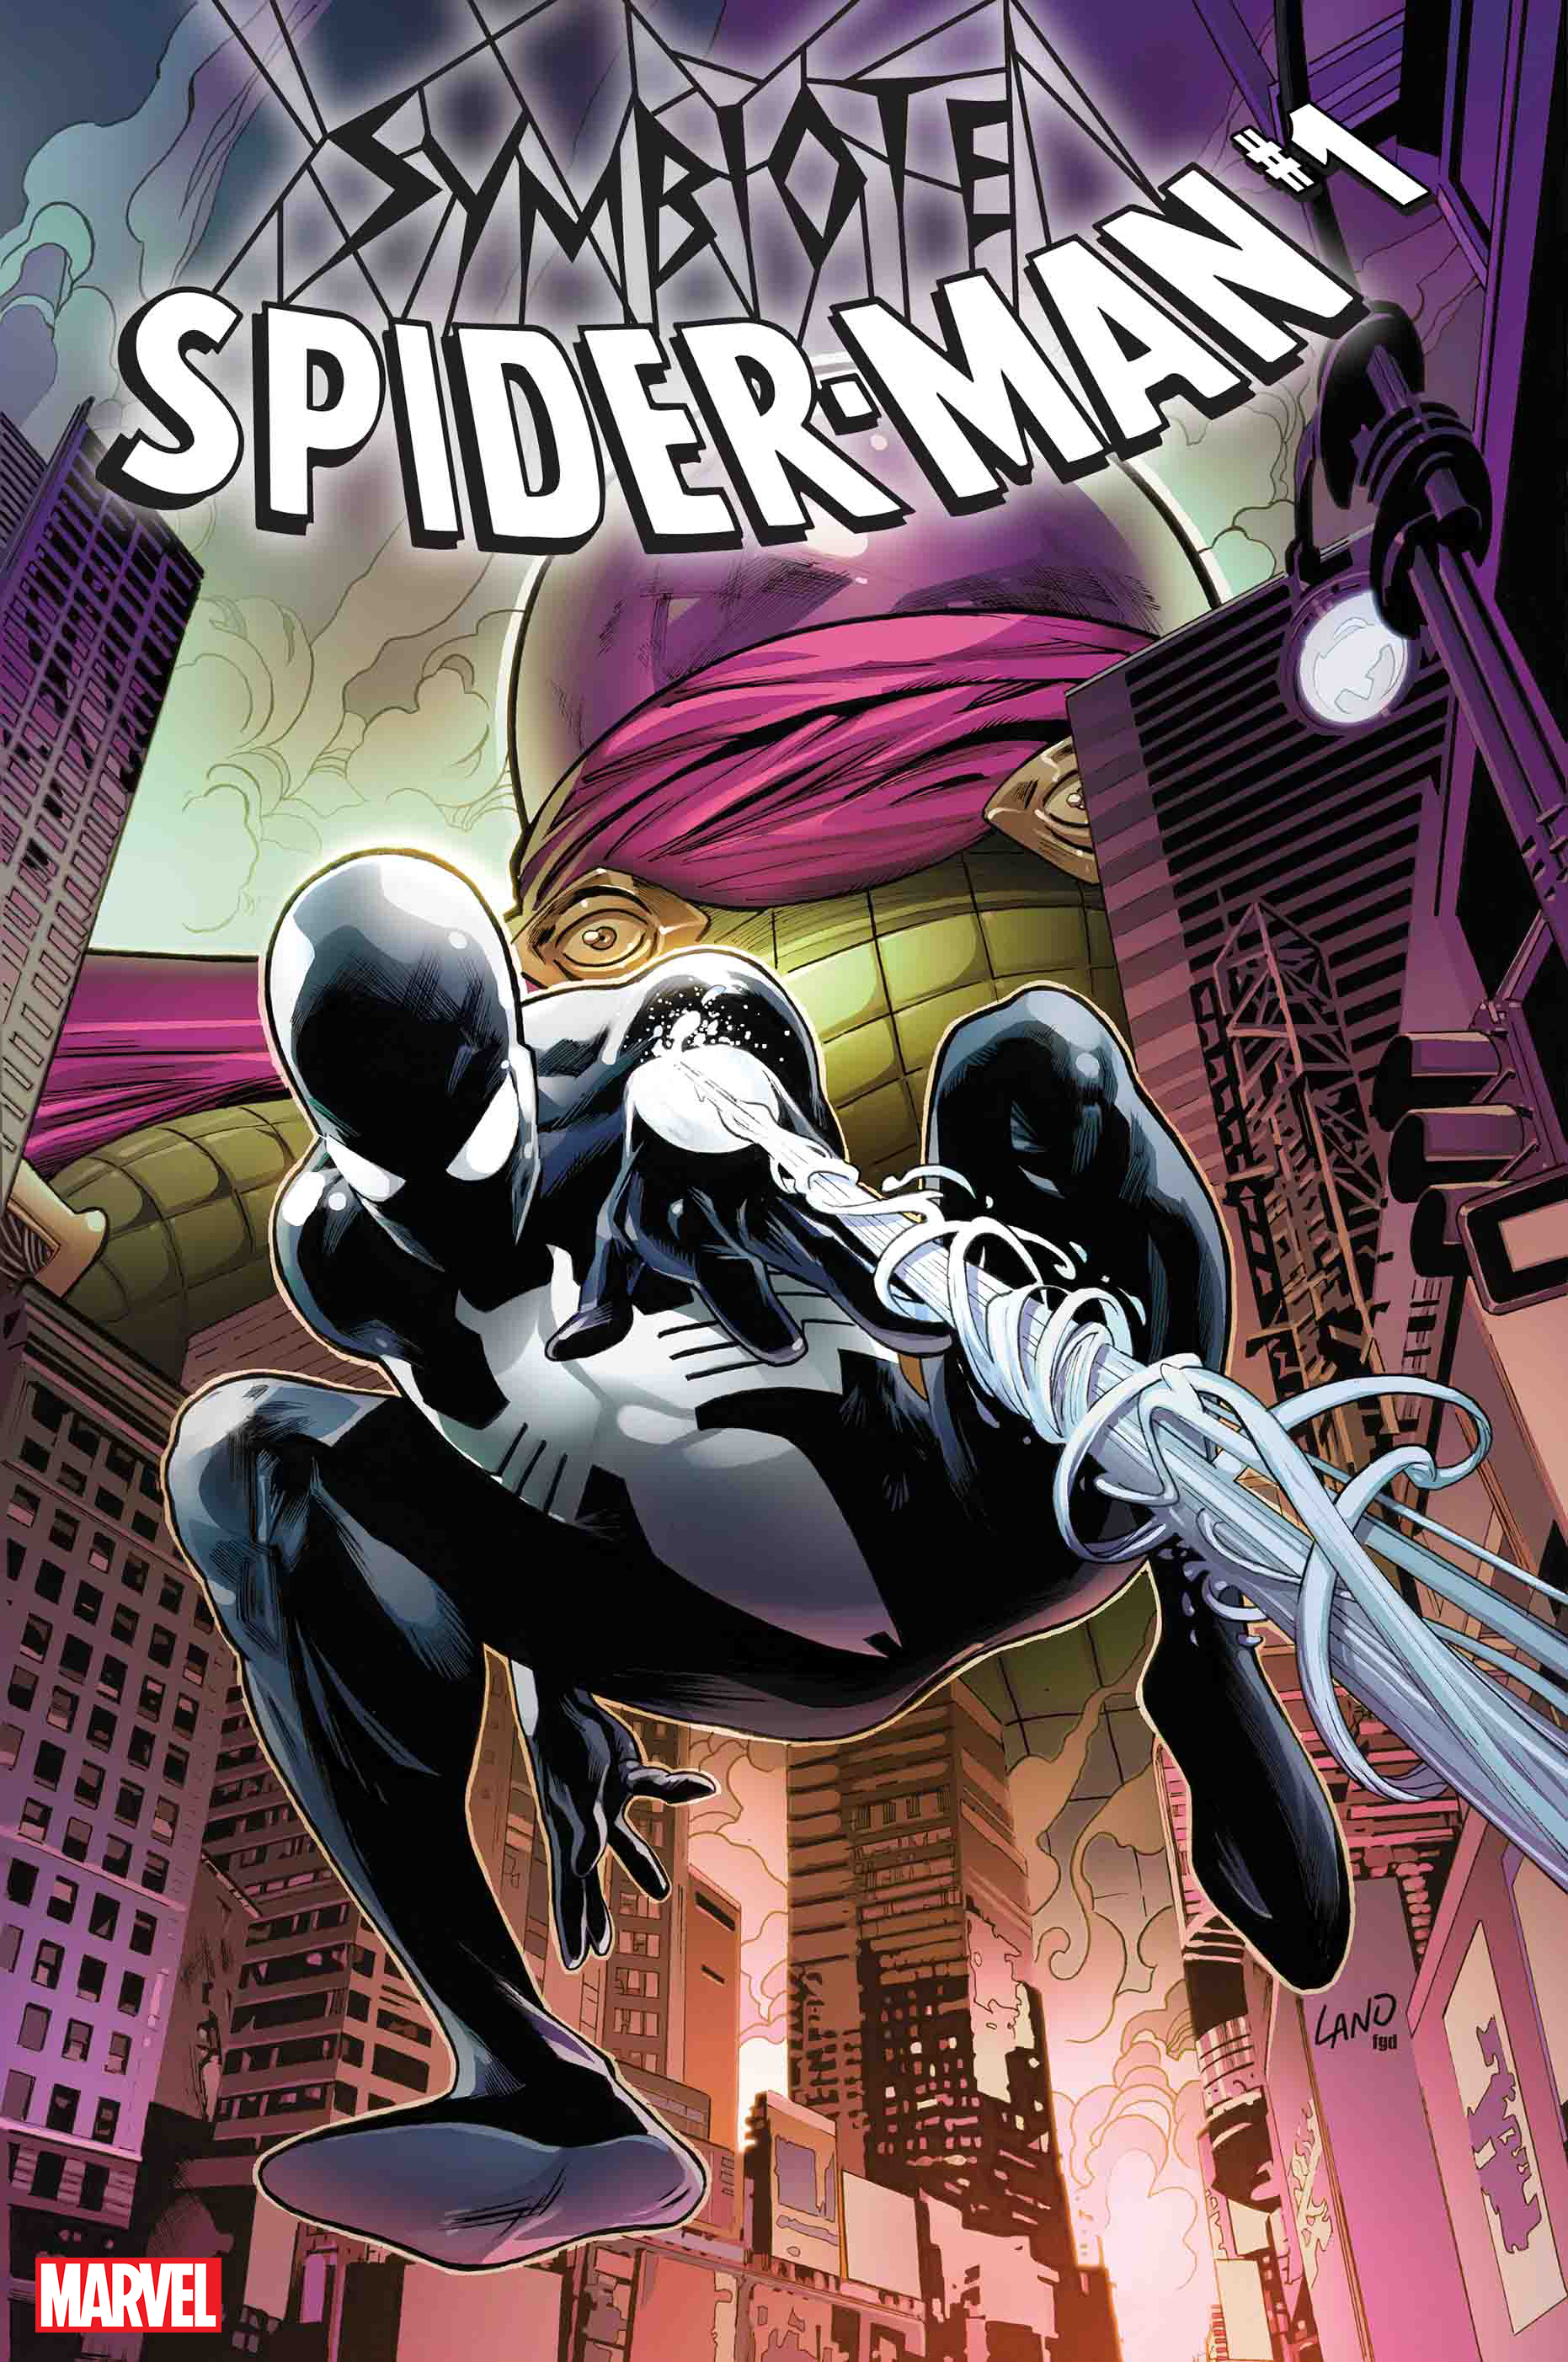 The BLACK COSTUME IS BACK in SYMBIOTE SPIDER-MAN #1!